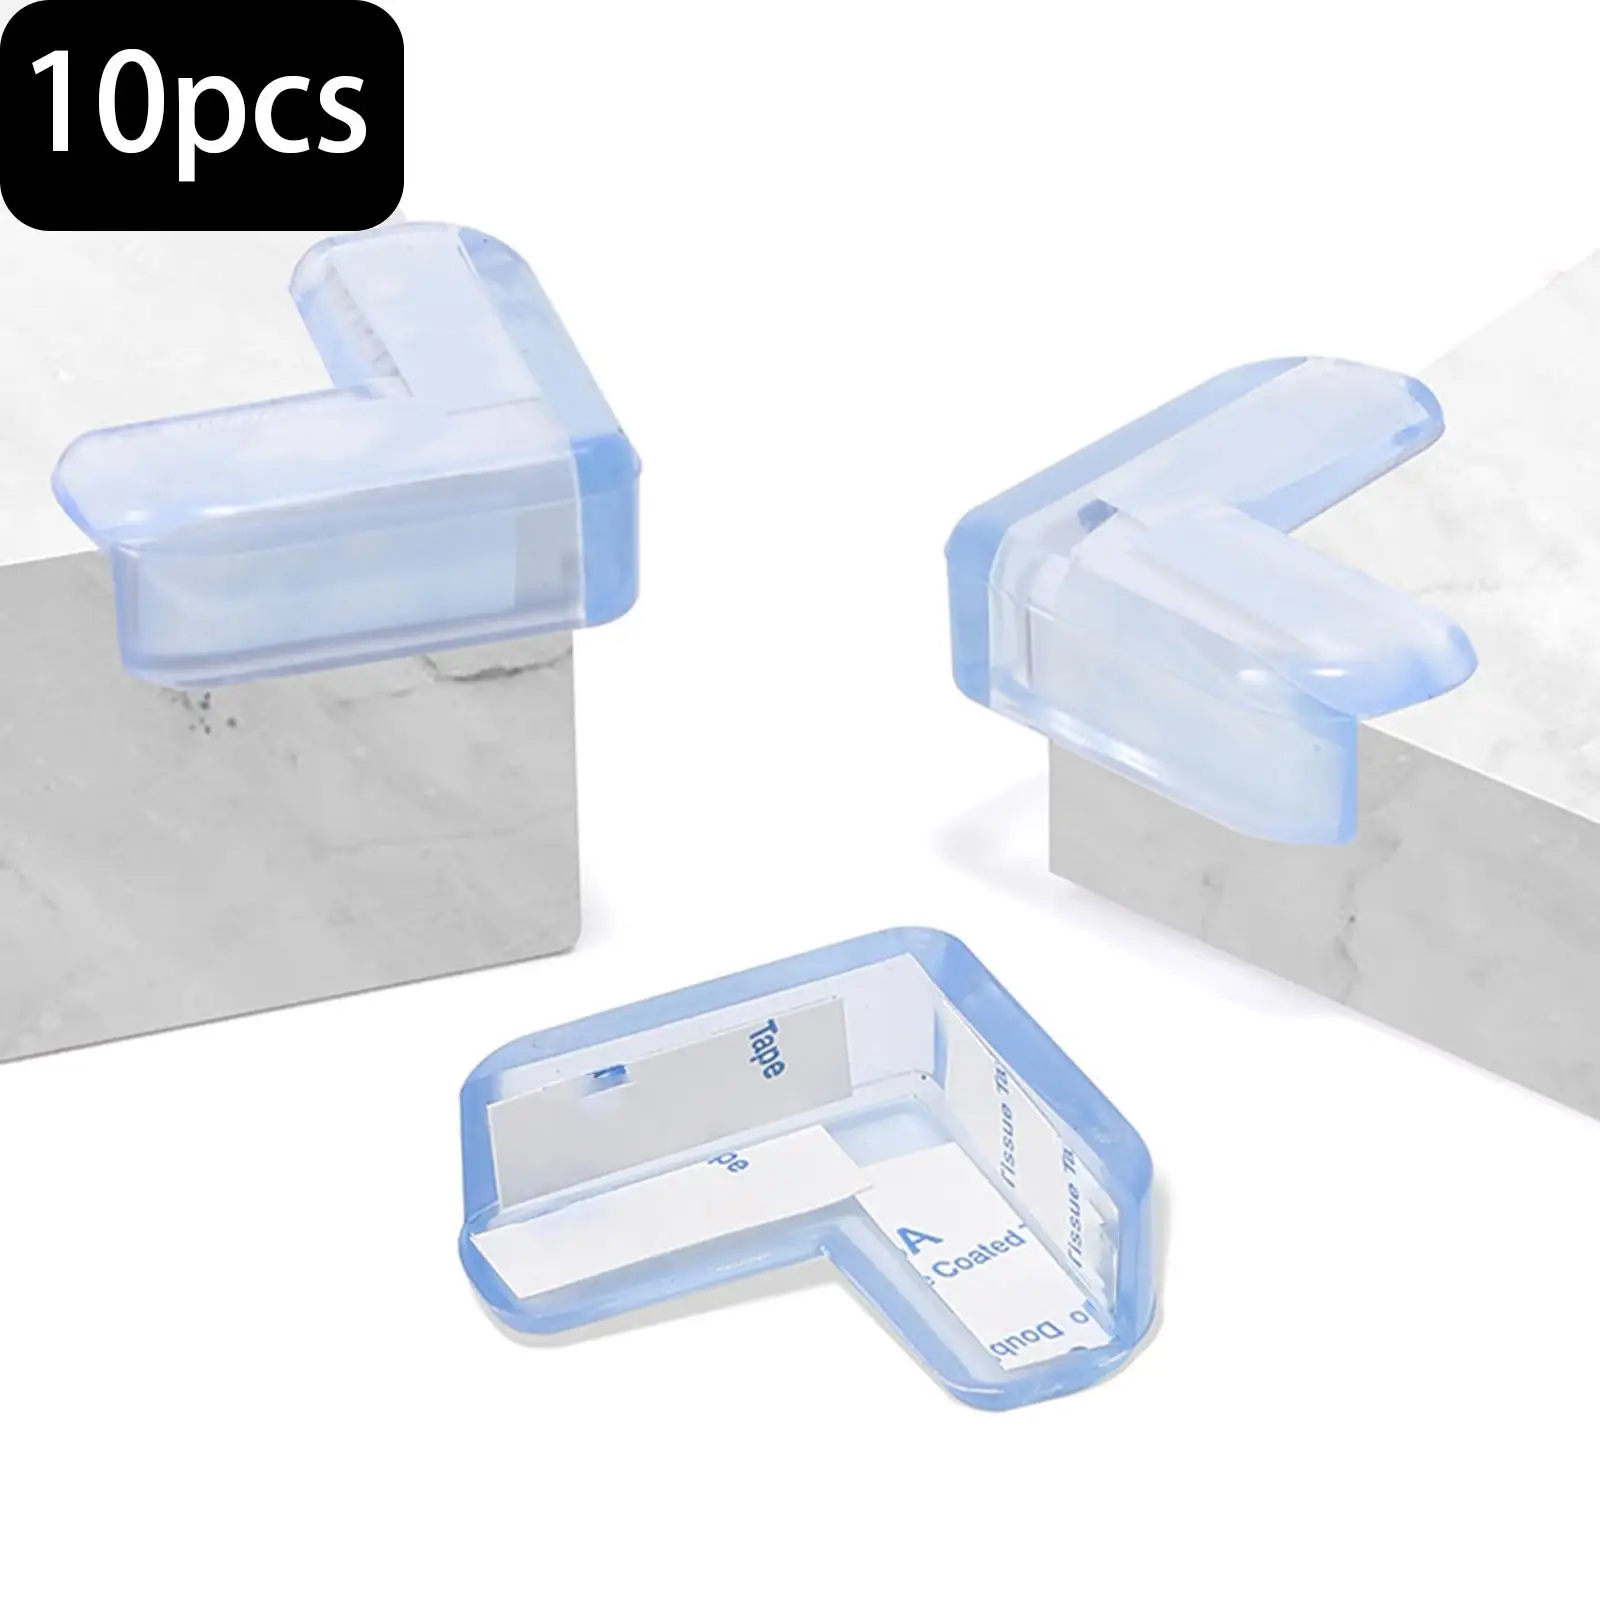 10x Table Corner Edge Protection Cover L-Shaped Kids Safety Anti Collision Table Corner Protector for Kitchen Furniture Cabinet